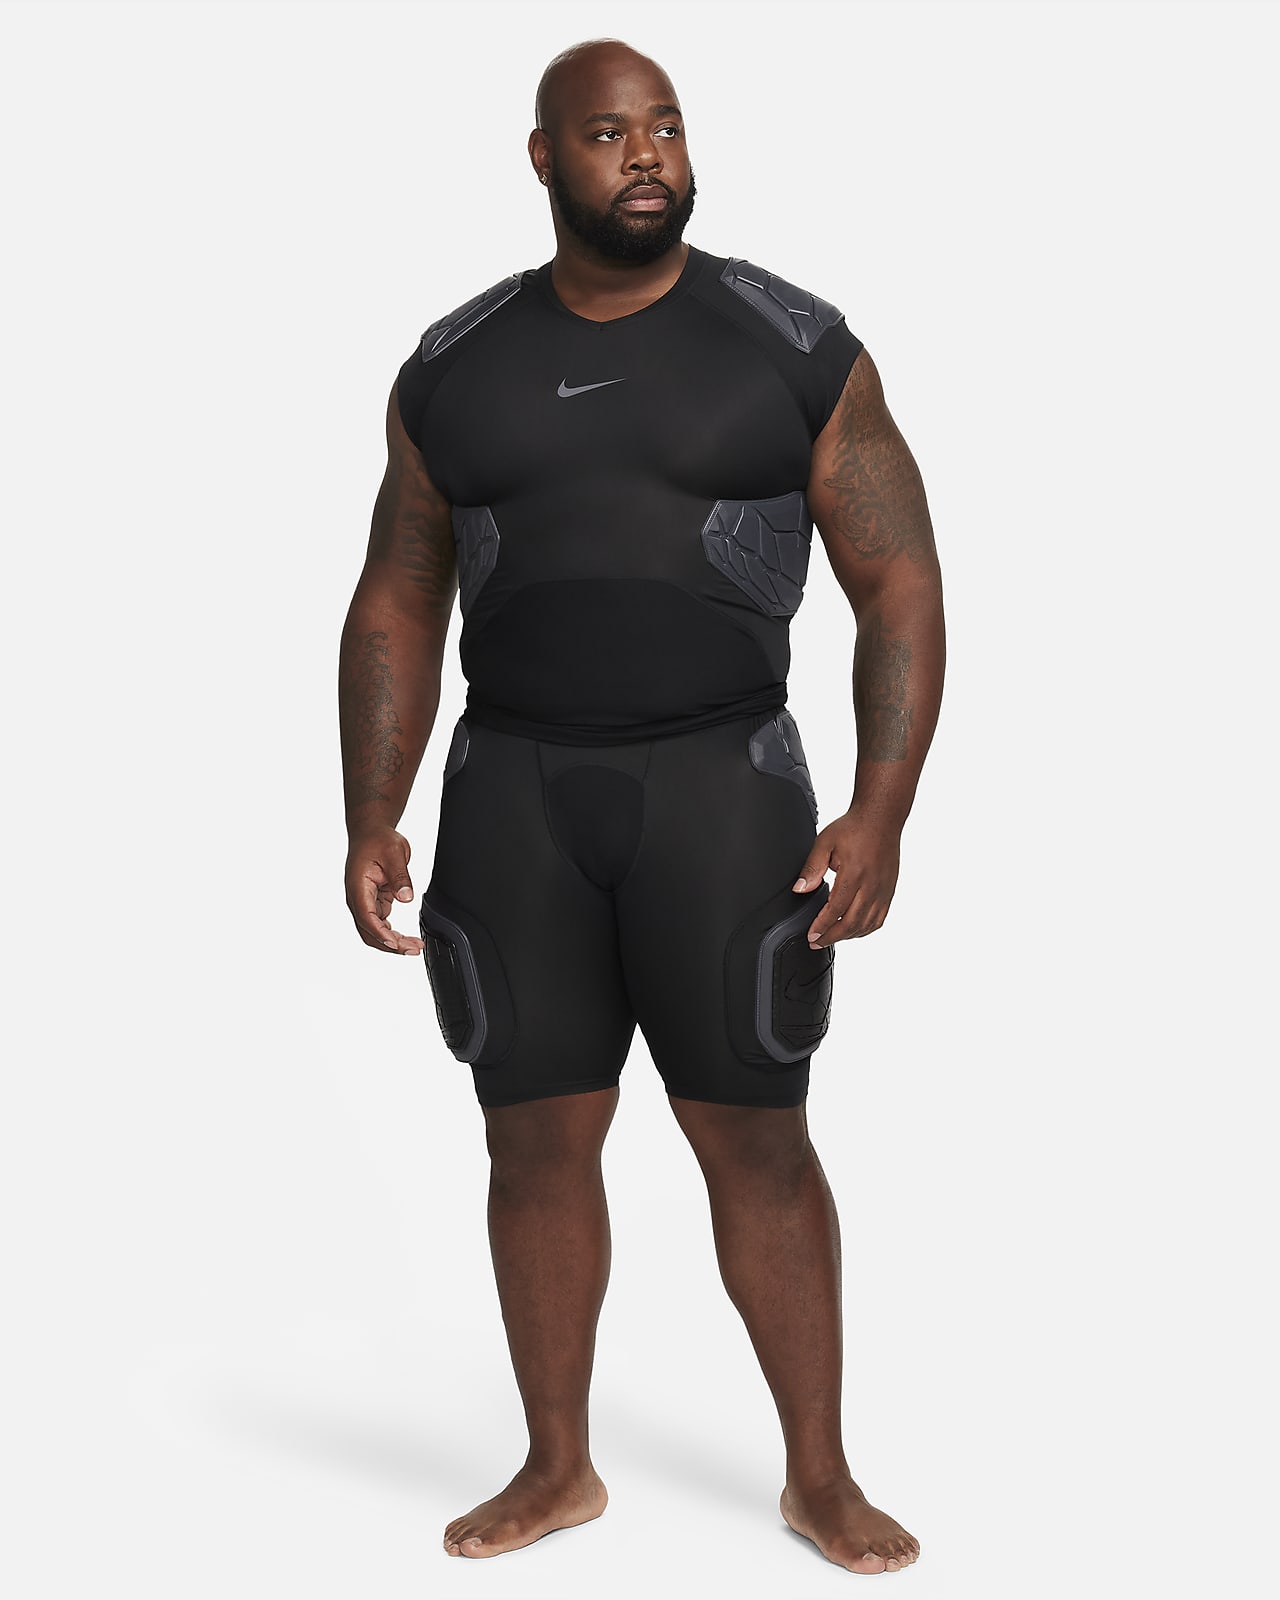 mens football XL nike pro hyperstrong 4 pad compression shirt/top ao6225